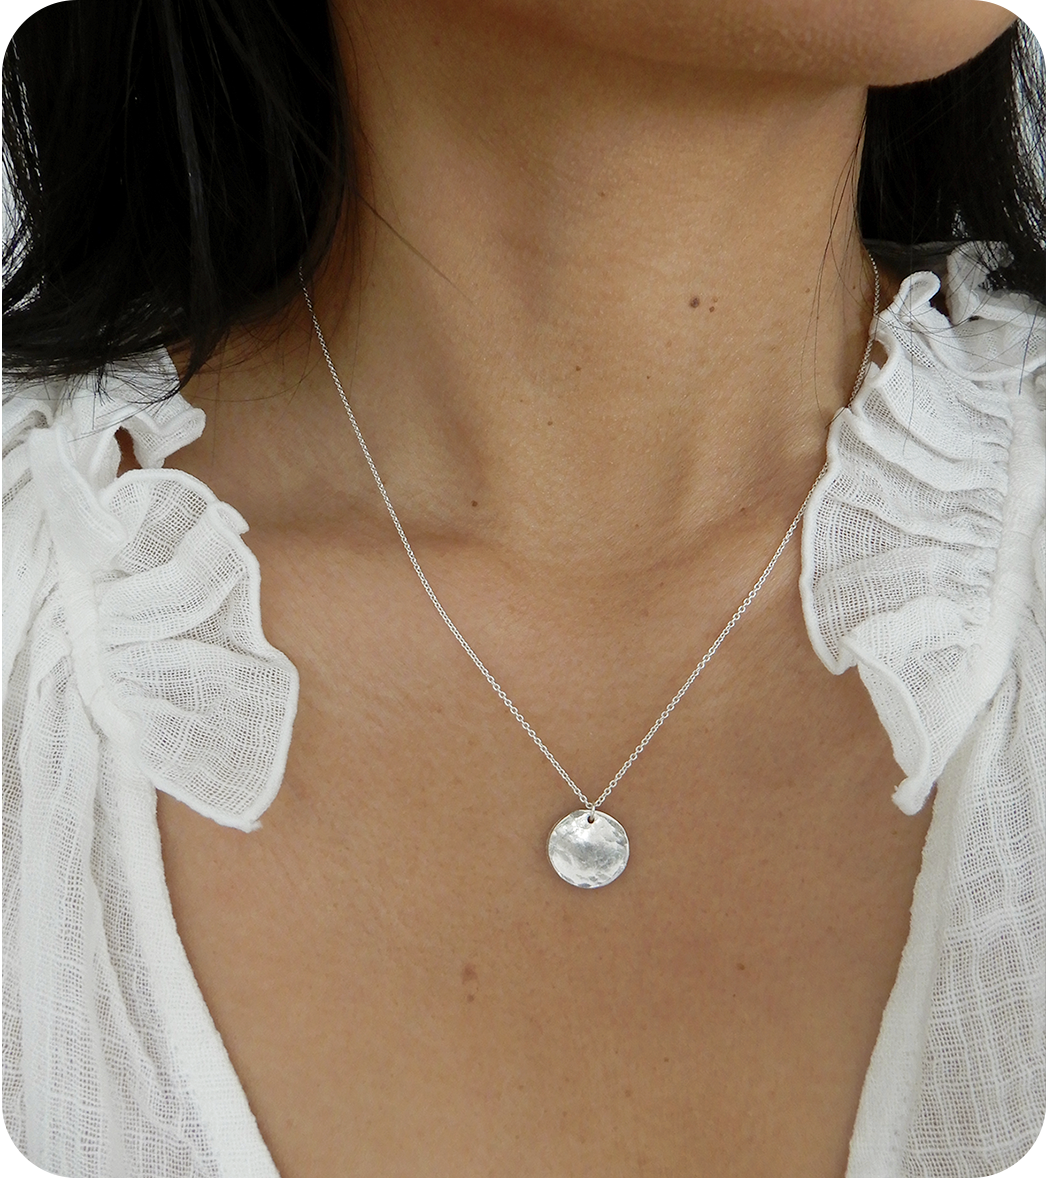 Necklace | The full moon